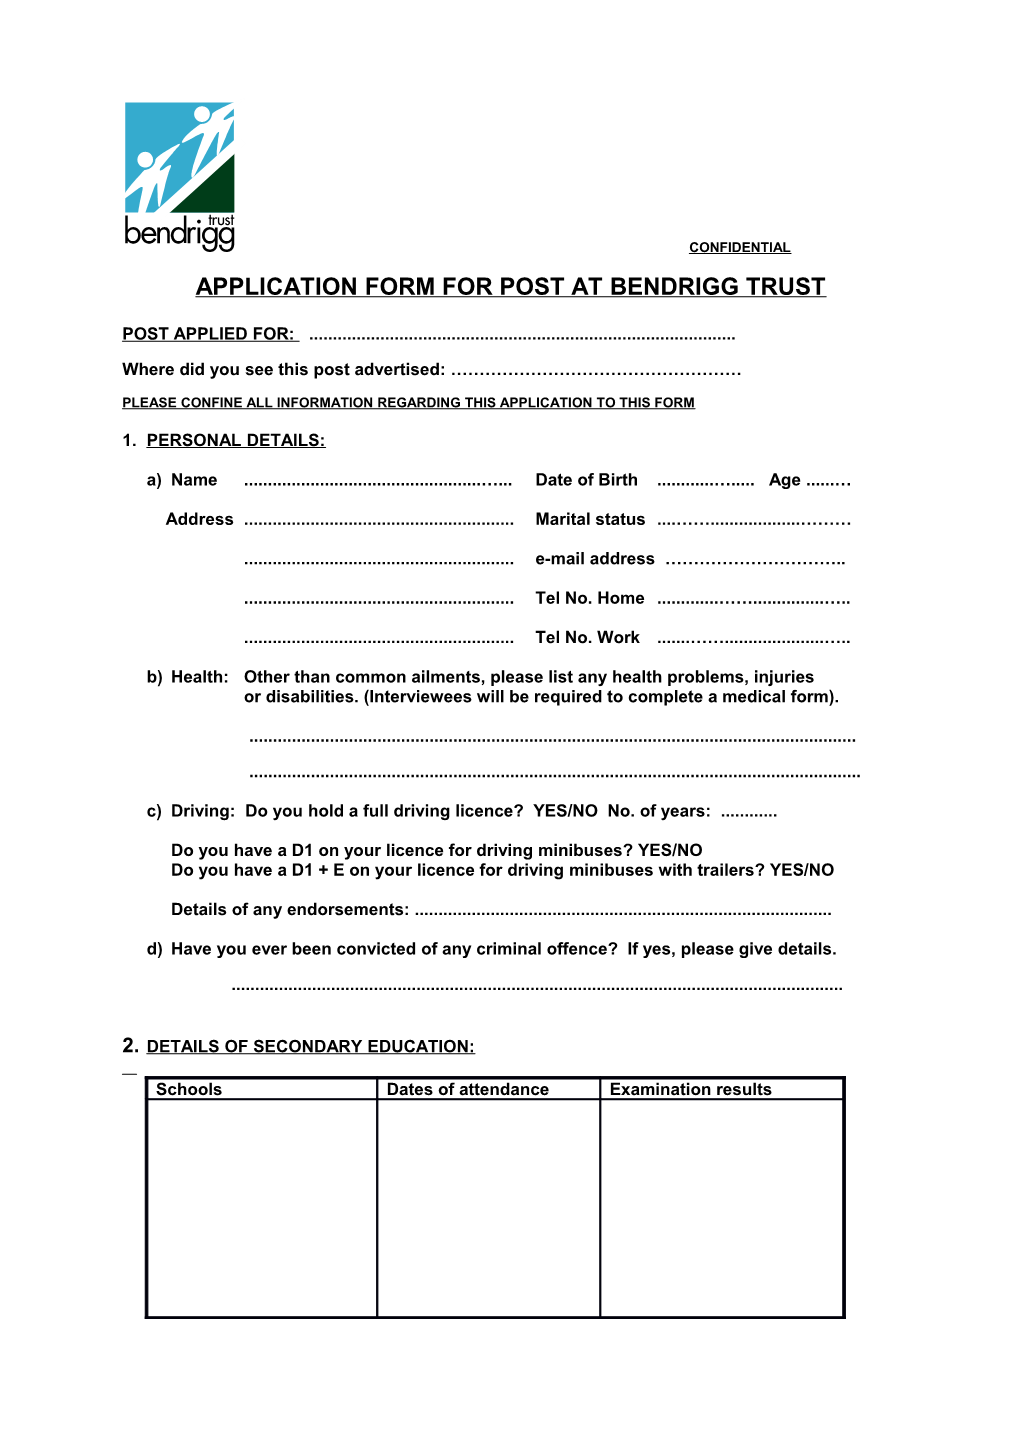 Application Form for Post at Bendrigg Trust